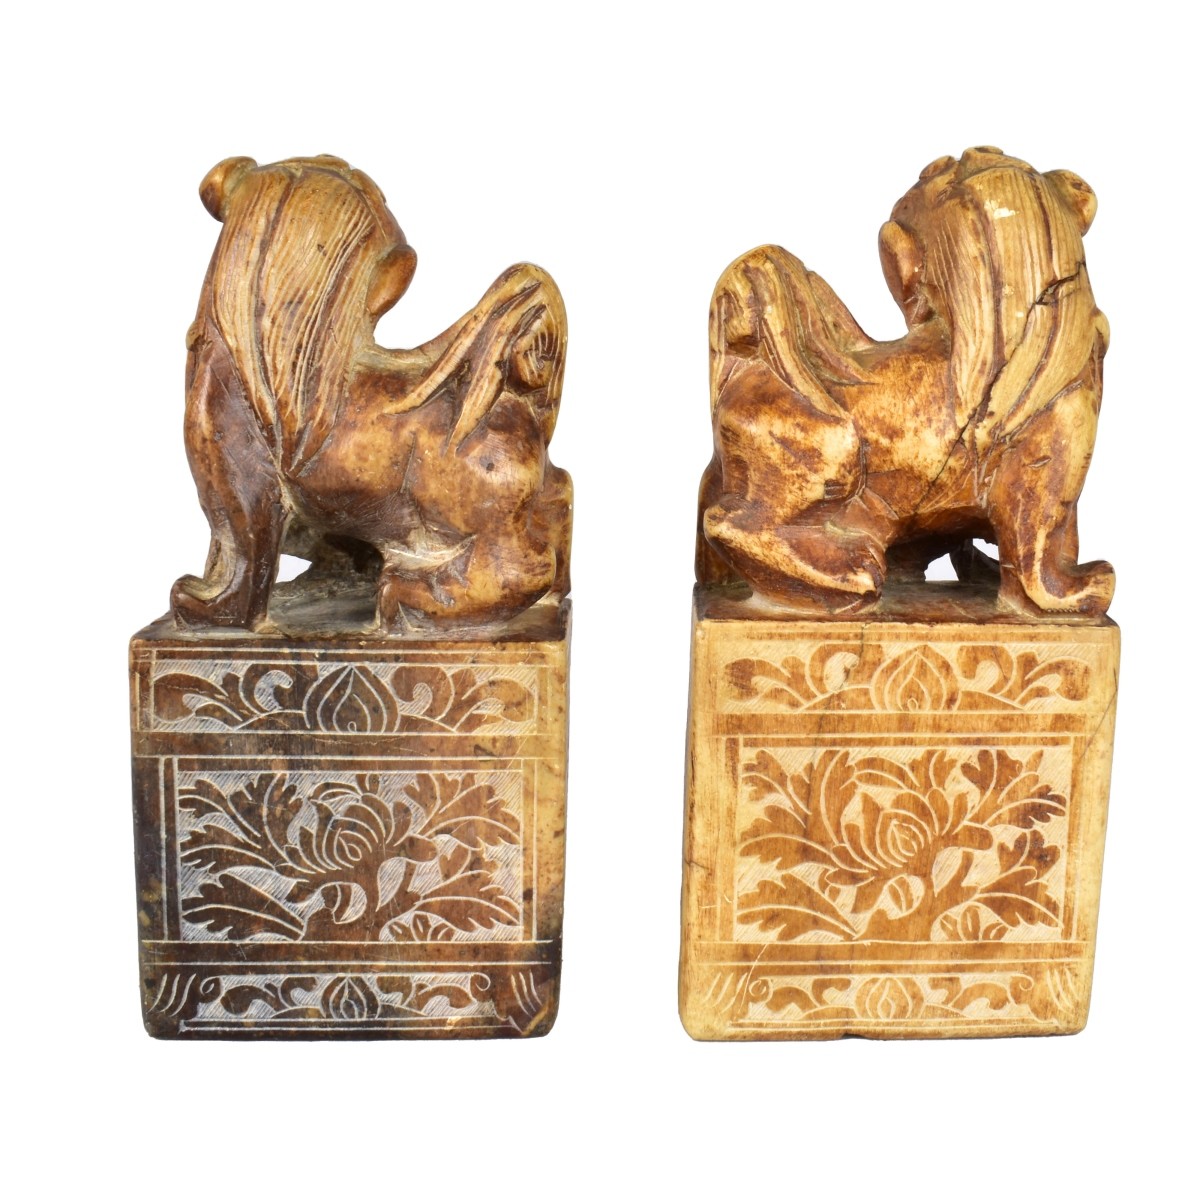 Pair of Chinese Soapstone Foo Dogs